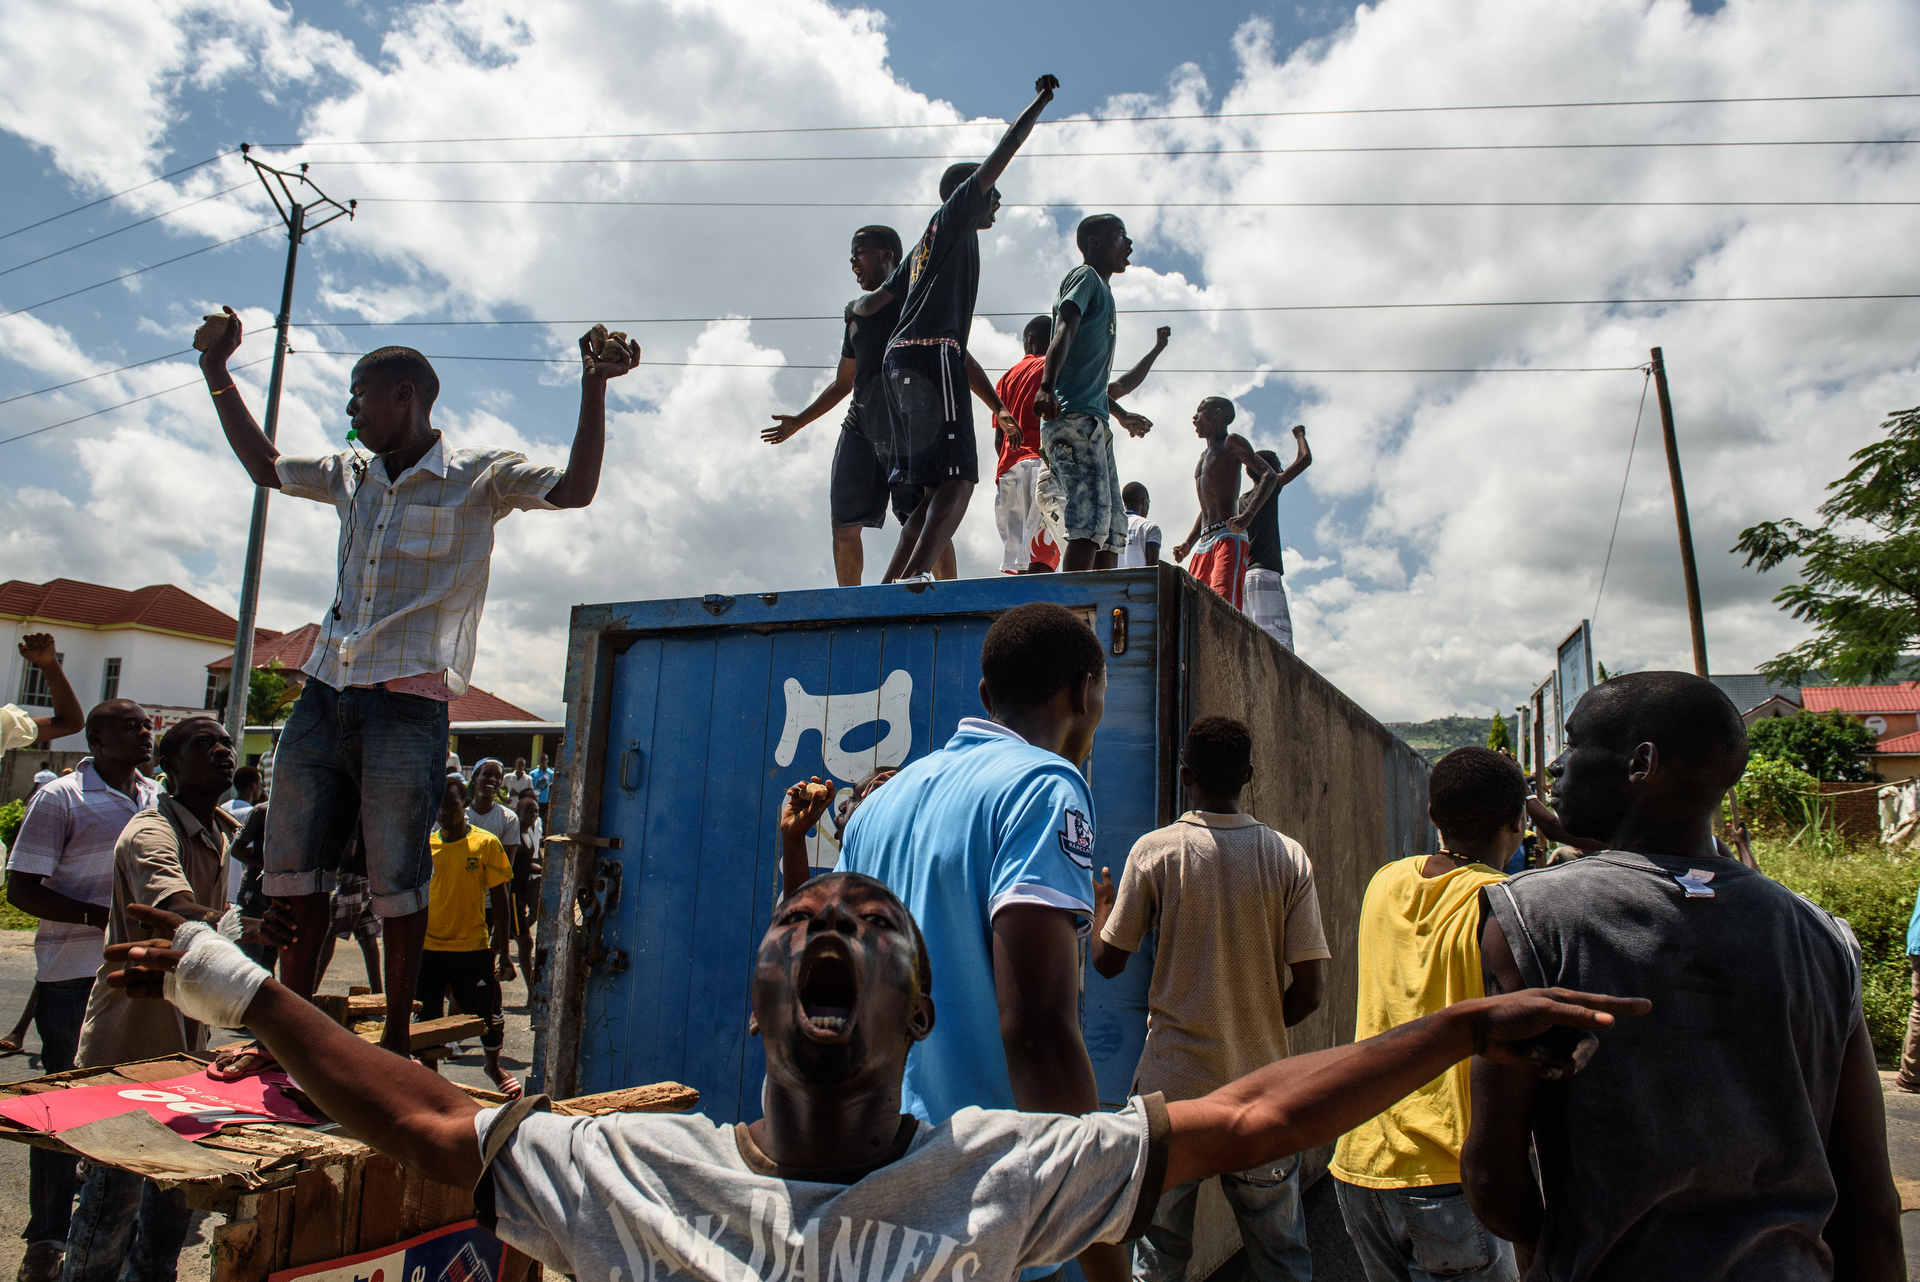  Protestors cheer after erecting a barricade out of shipping container and pushing back the police. Demonstrations protesting incumbent president Pierre Nkurunziza's bid for a 3rd term continued in Bujumbura, Burundi on 13 May 2015. 